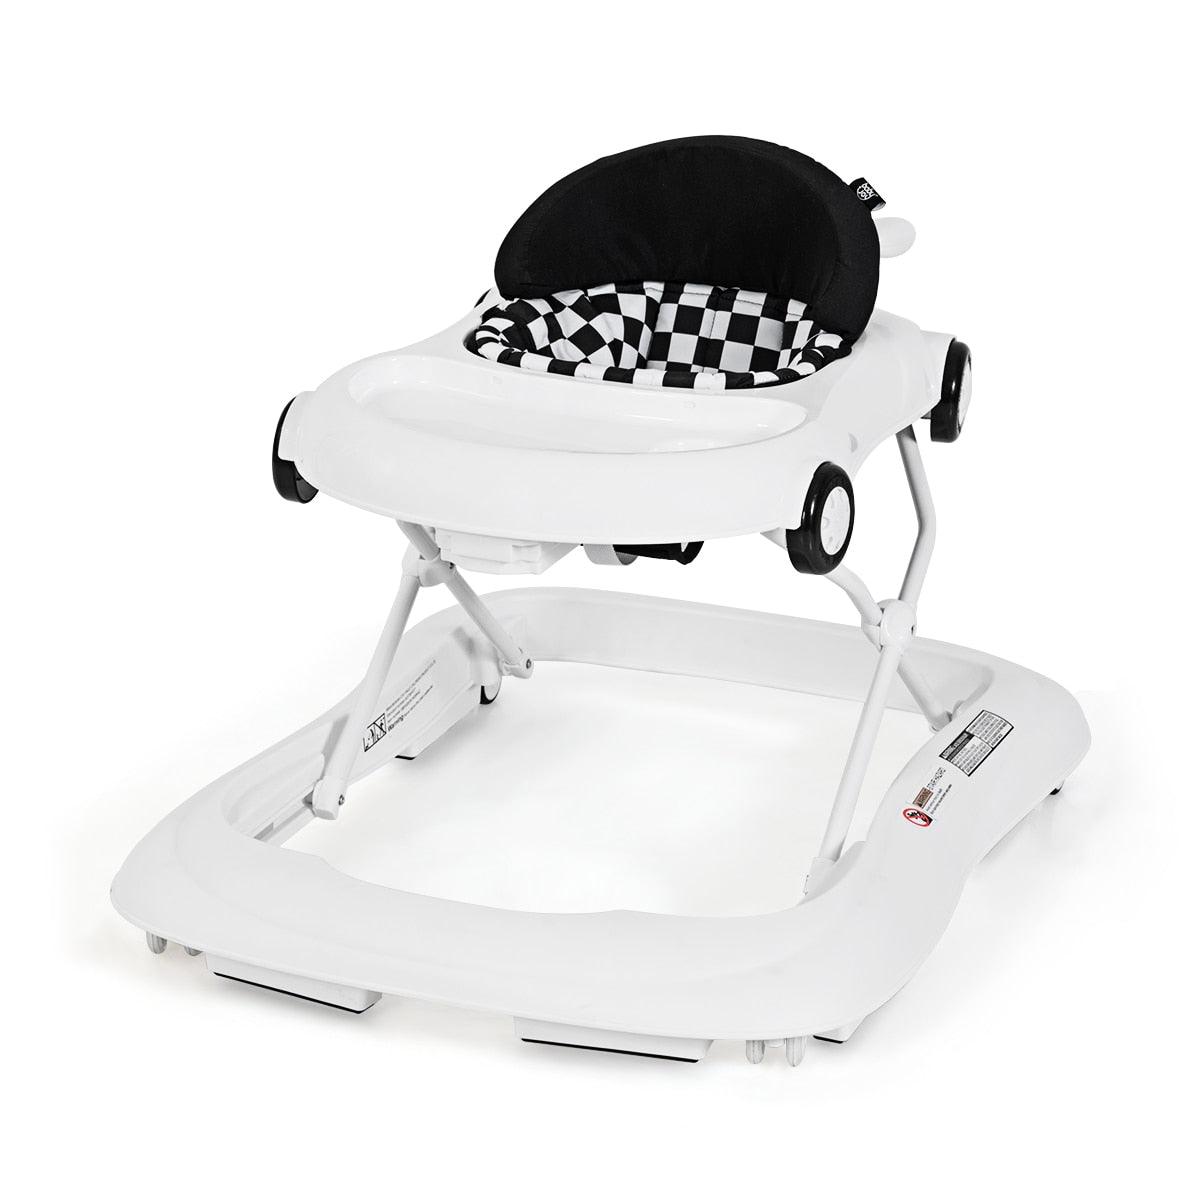 Gorgeous 2-in-1 Foldable Baby Walker Adjustable Heights With Music Player & Lights White (1U01)(X9)